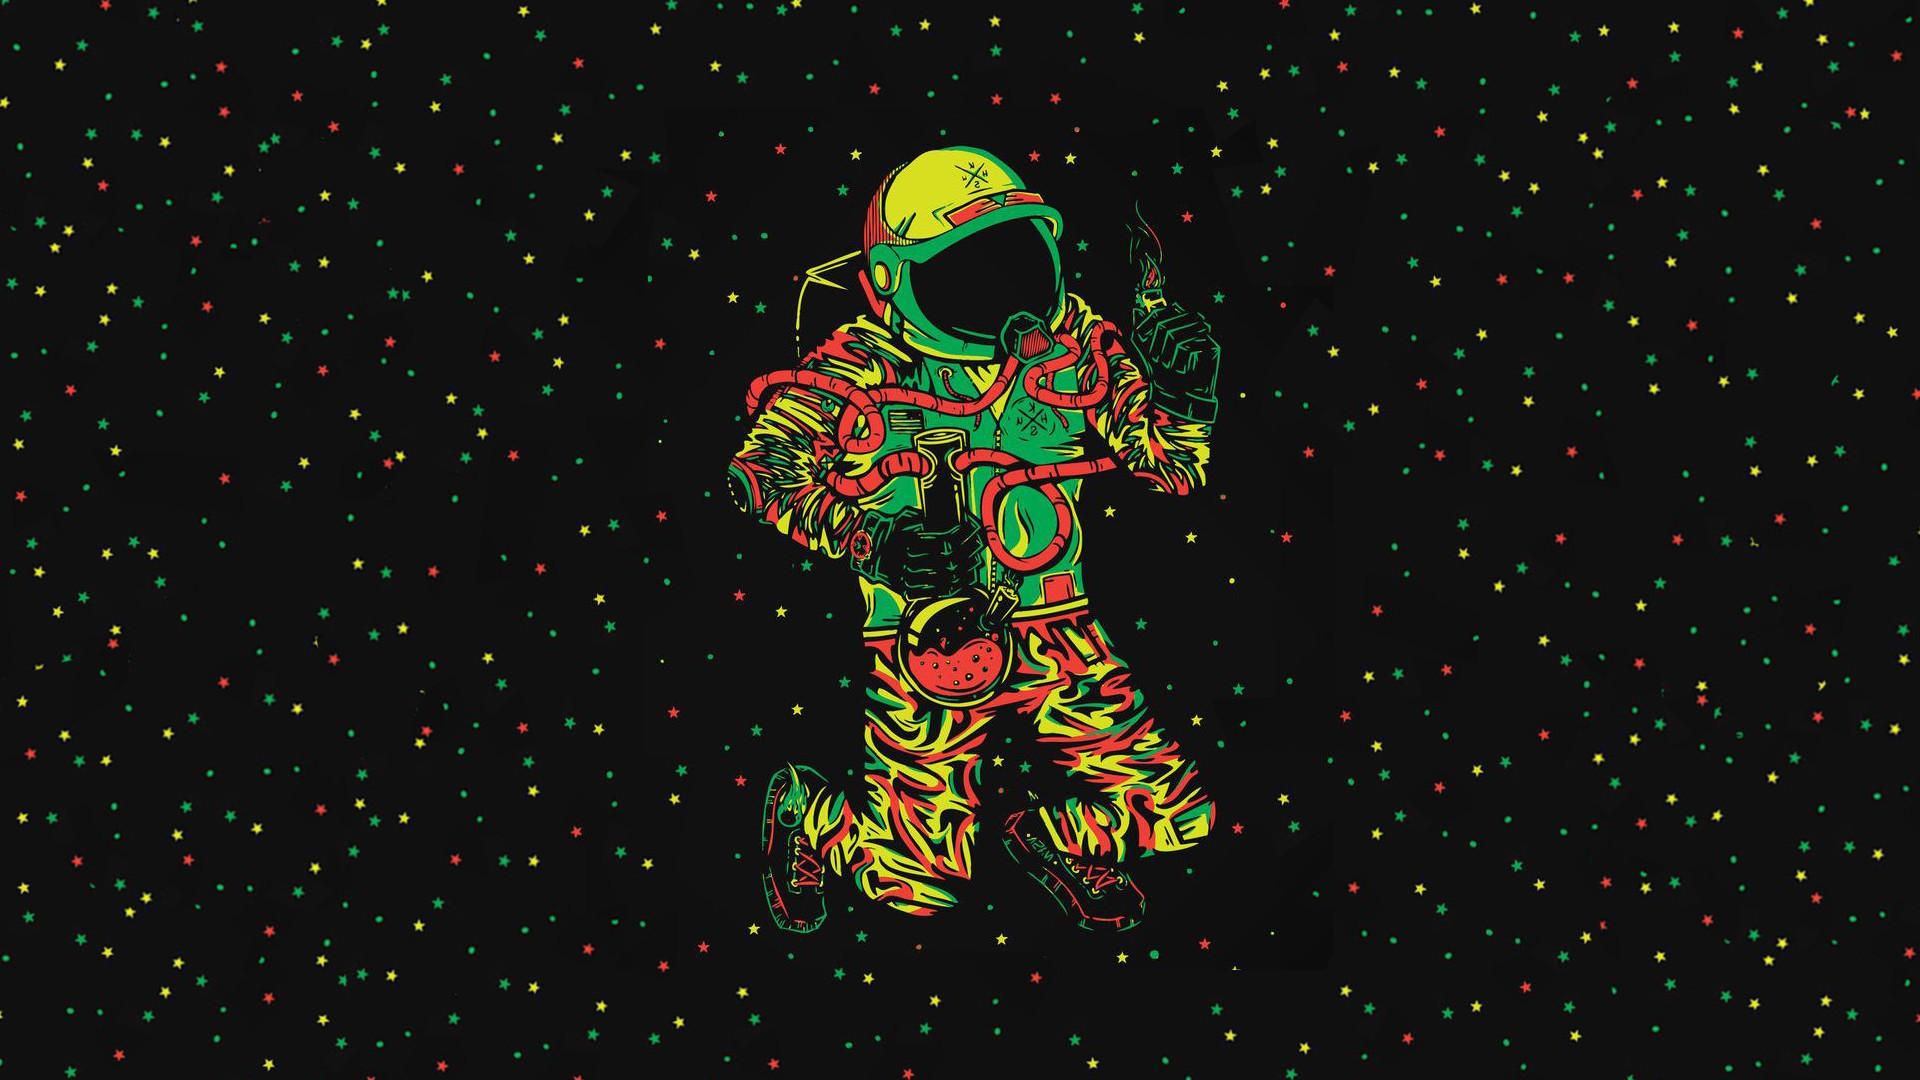 Astronaut Space Aesthetic Wallpapers - Wallpaper Cave